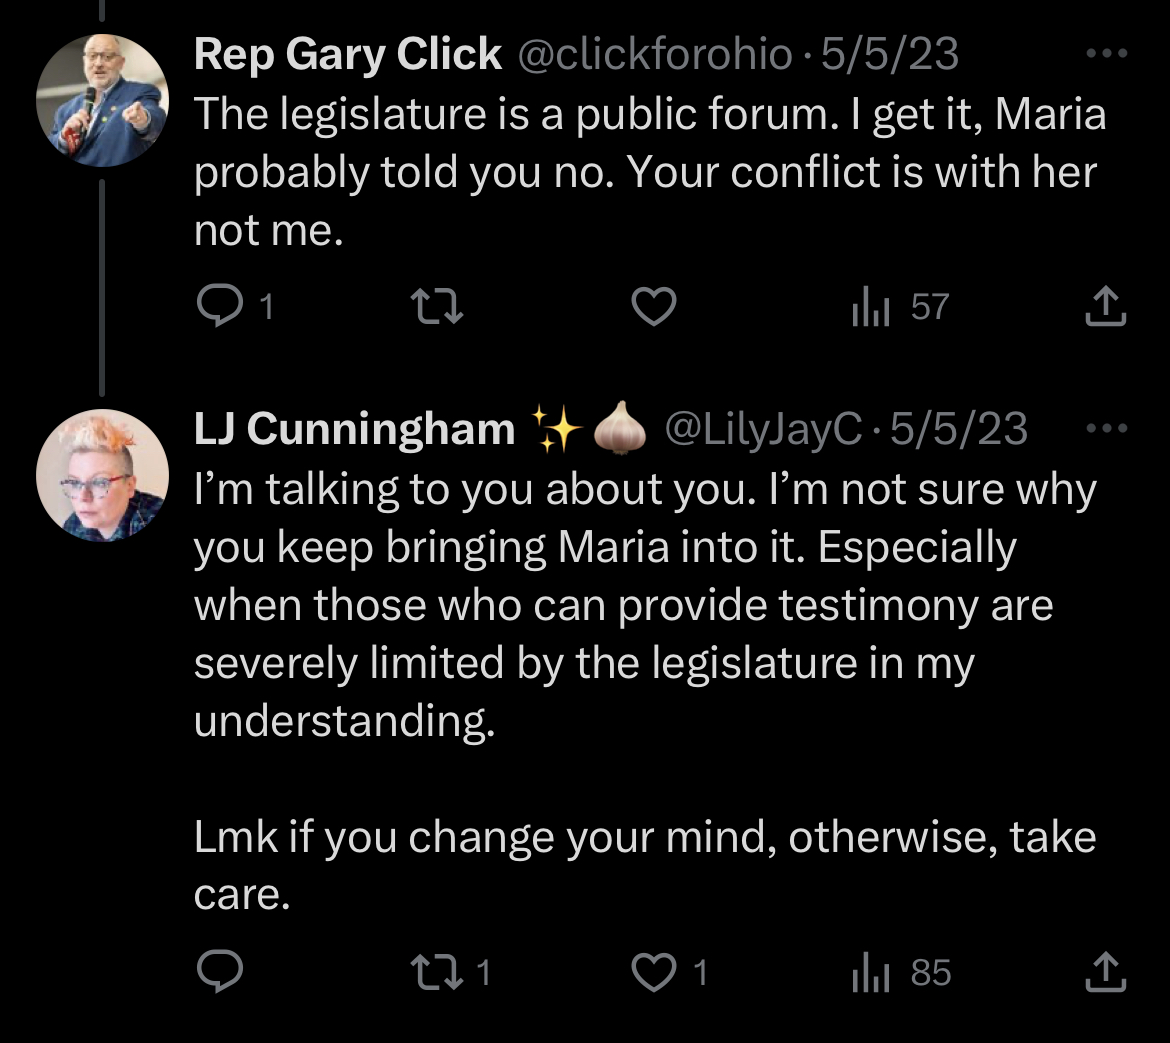 Gary Click again deflect to "Maria" regarding opponent testimony and says, "I get it. Maria probably told you no. Your conflict is with her, not me. I reply, I'm talking to you about you. I'm not sure why you keep bringing Maria into this. Especially when those who can provide testimony are severely limited by the legislature in my understanding. Lmk if you change your mind. Otherwise, take care.